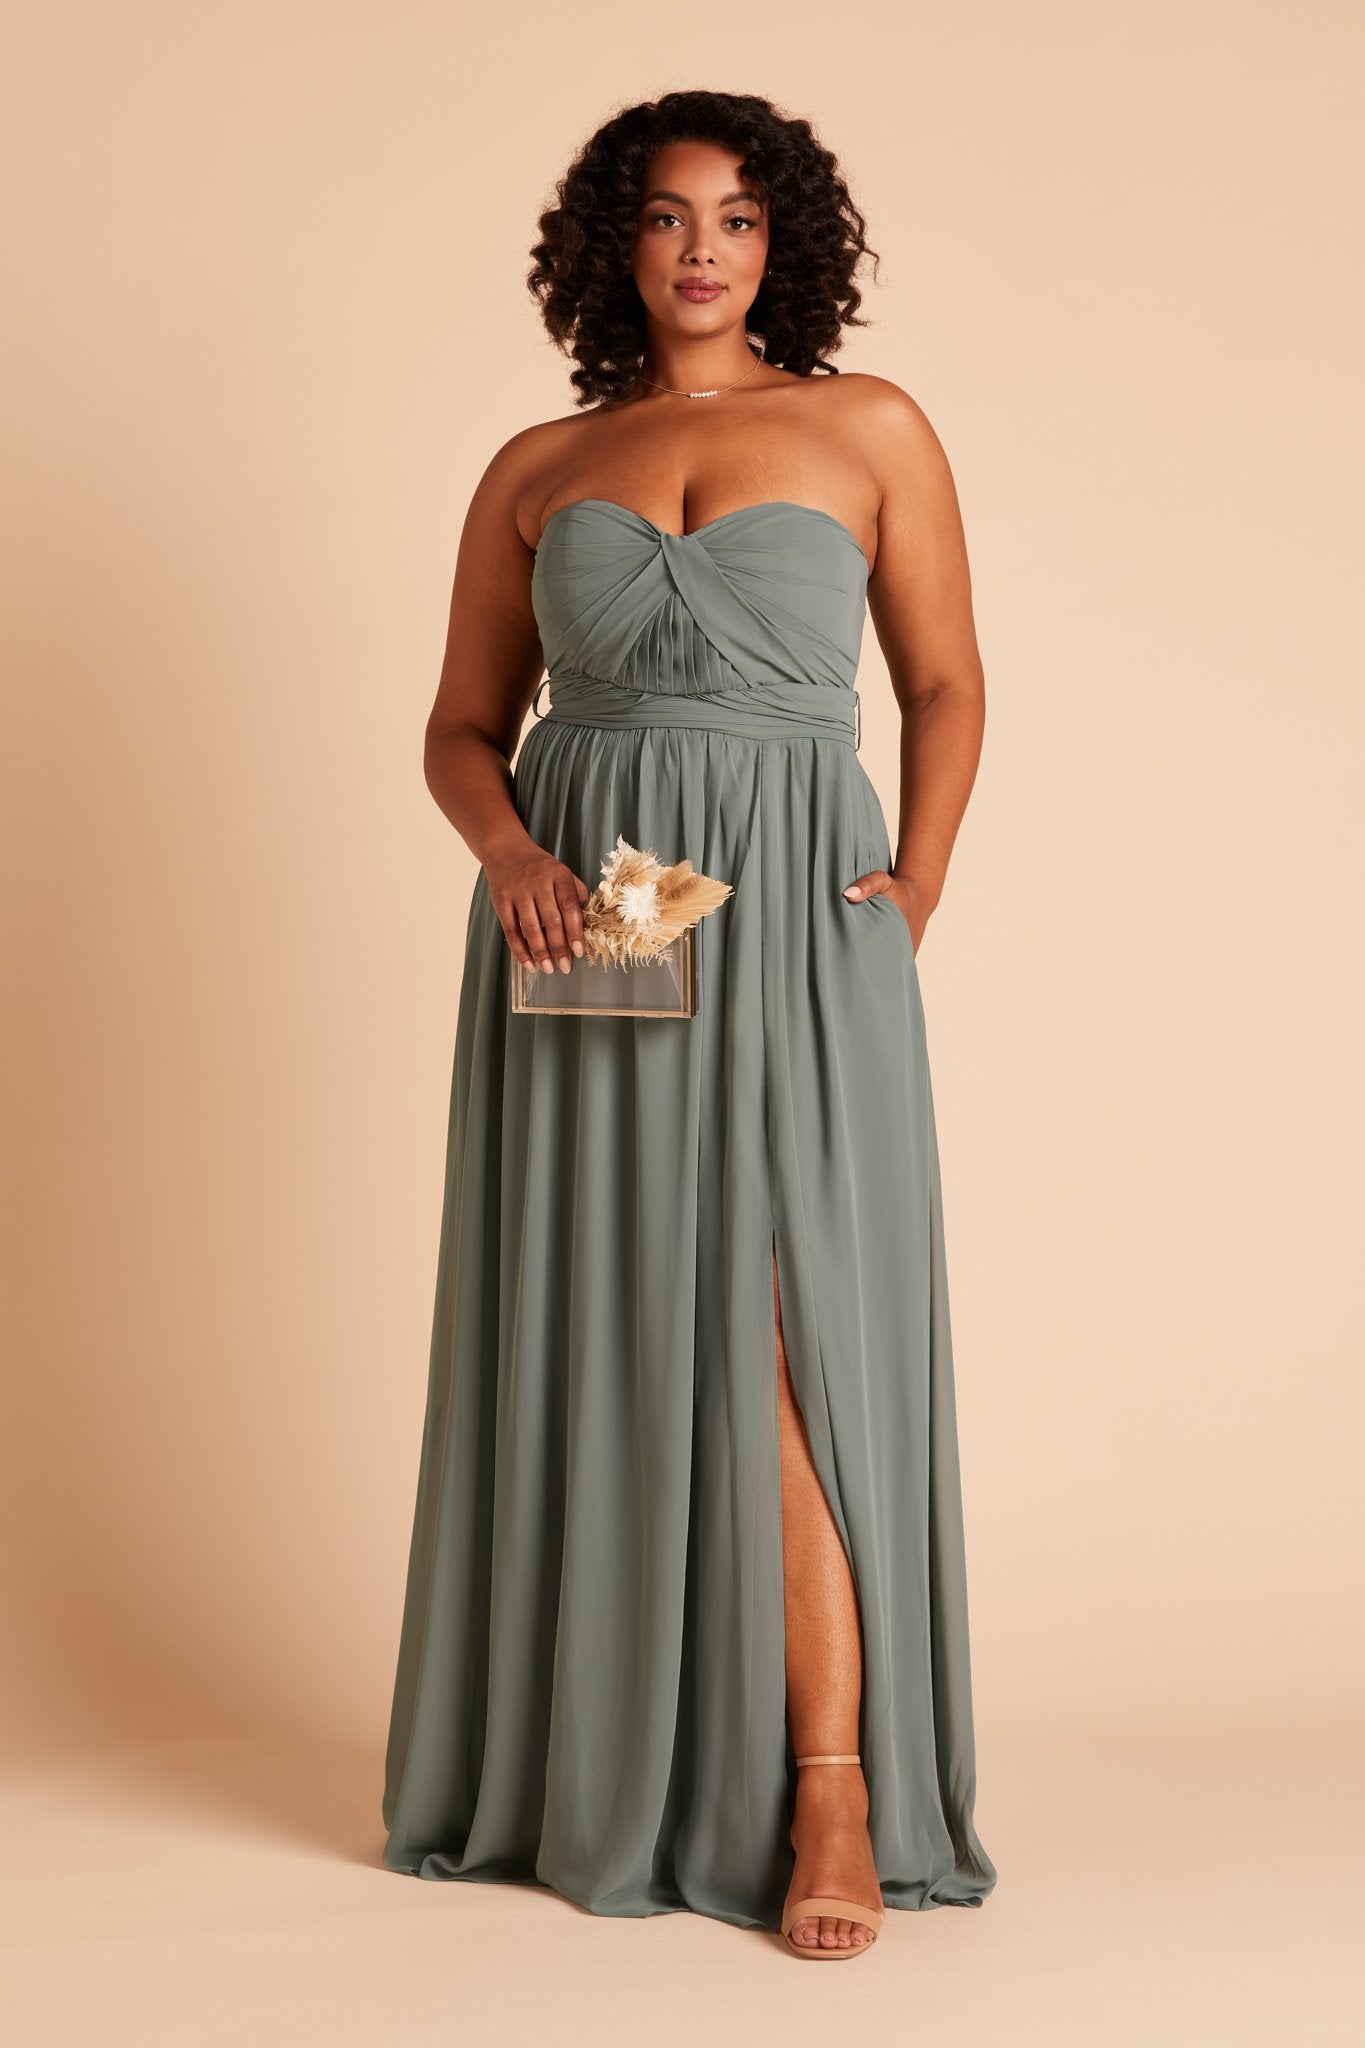 Front view of the Grace Convertible Plus Size Dress in sea glass chiffon as the model rests her left hand in the hidden side pocket.